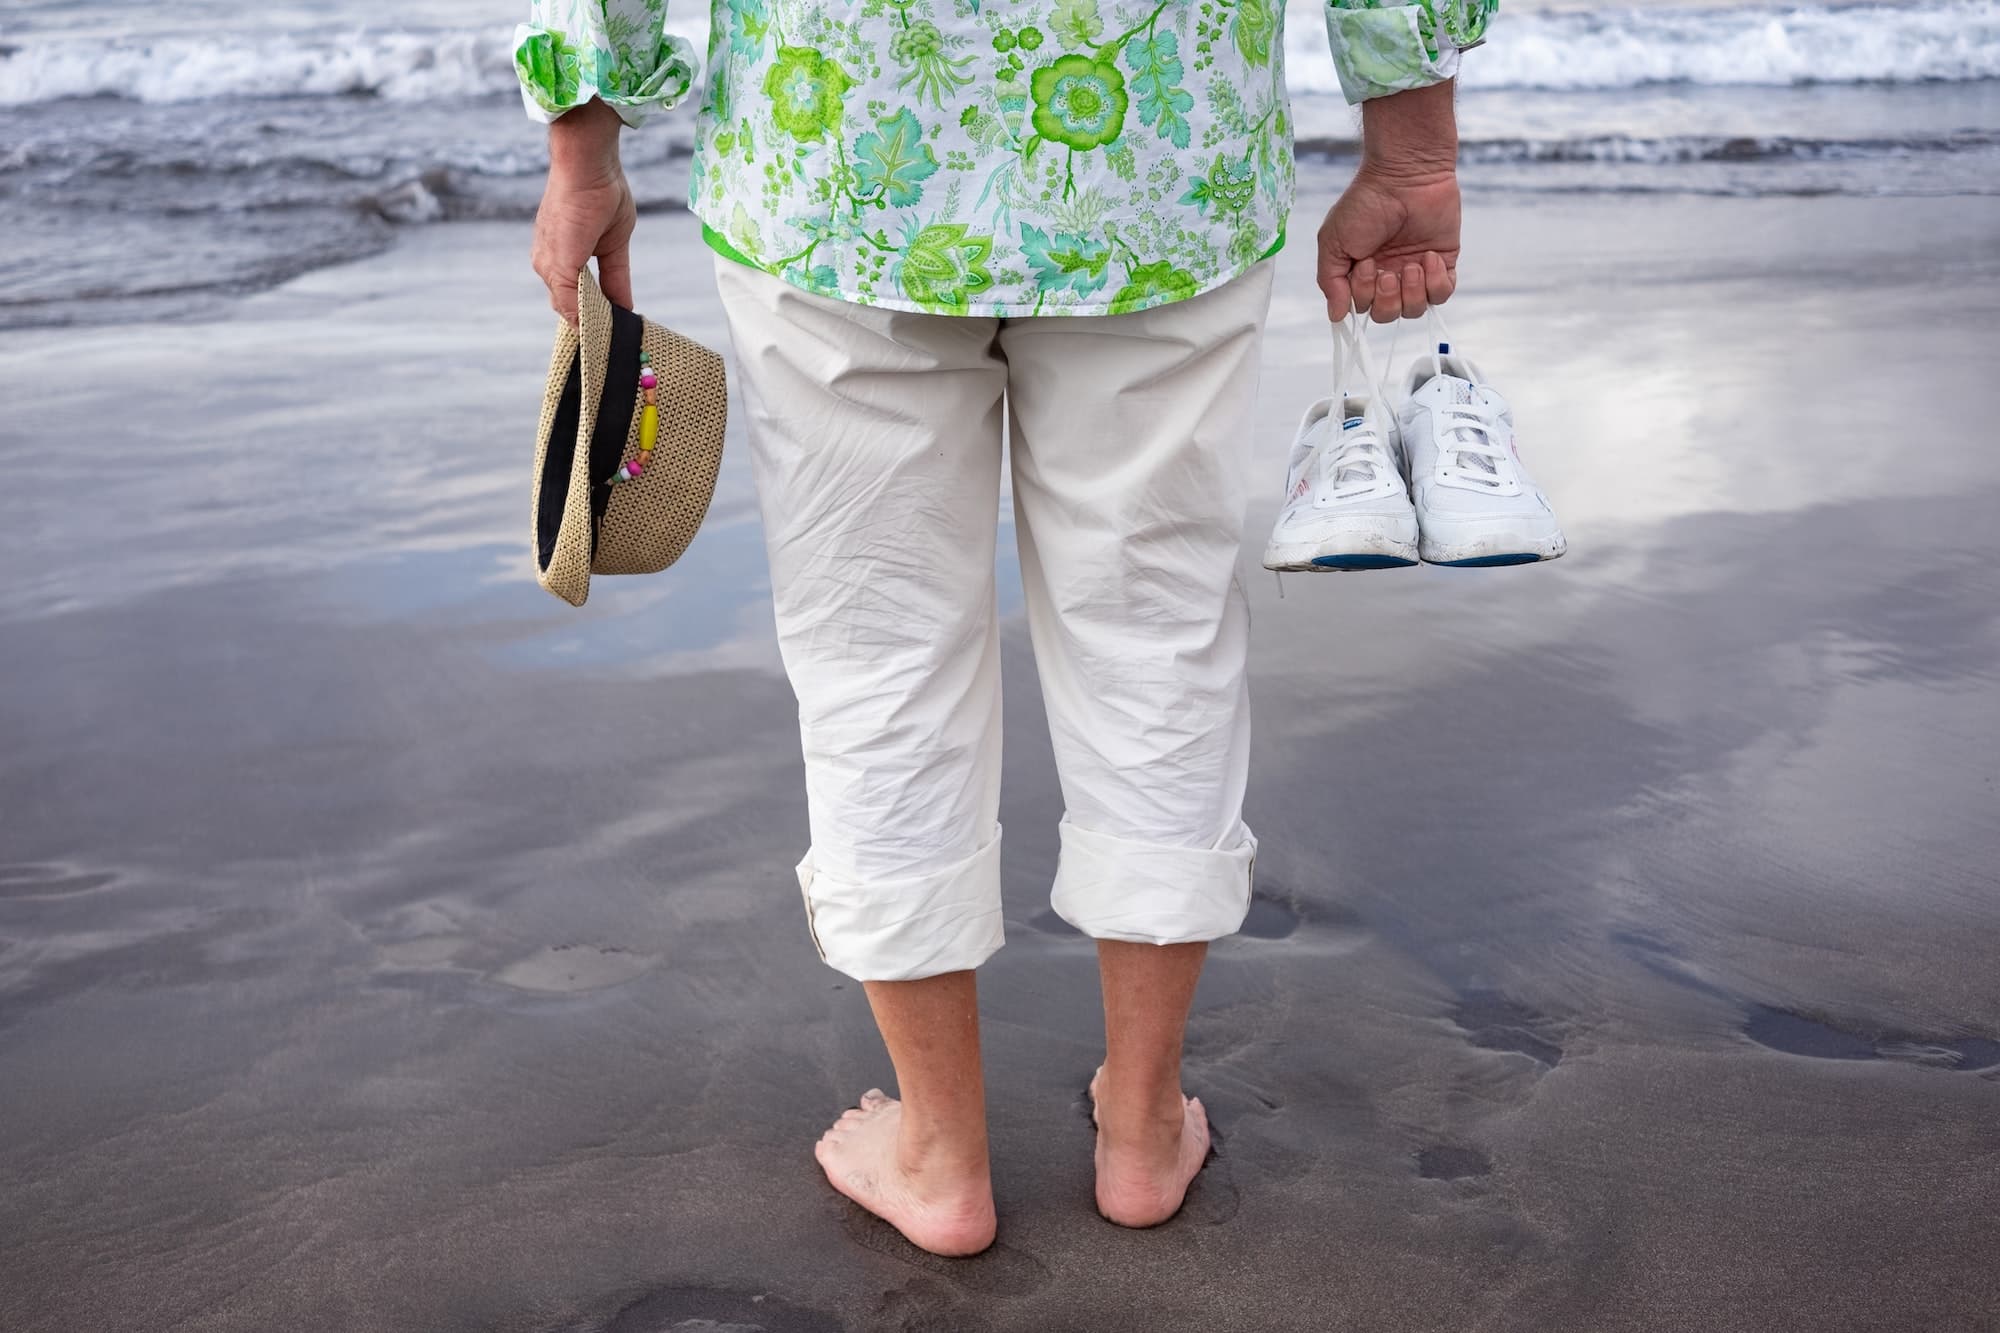 https://physioed.com/wp-content/uploads/rear-view-of-senior-man-barefoot-walking-on-sea-shore-holding-shoes-and-hat-in-hands.jpg